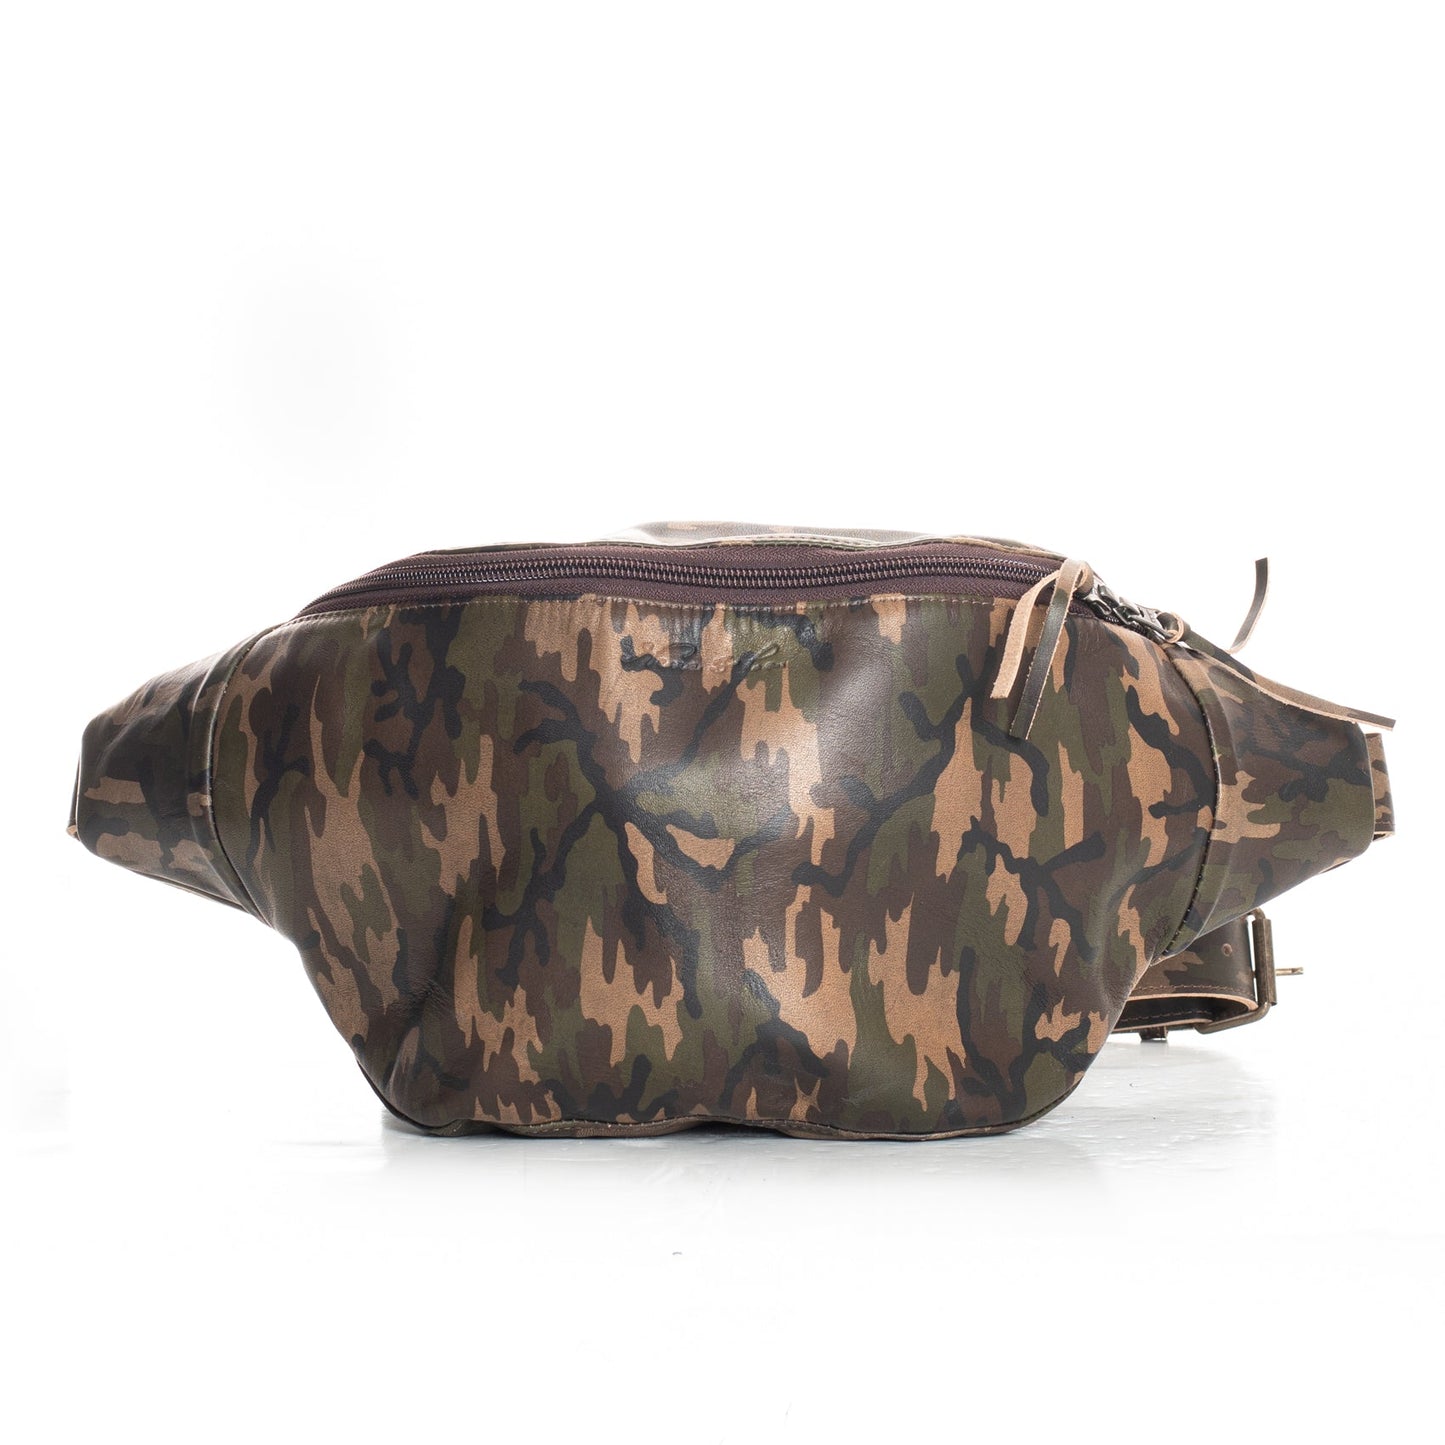 EL DON MANNY PACK - FULL LEATHER COLLECTION - CAMOUFLAGE OR VINTAGE ROSE